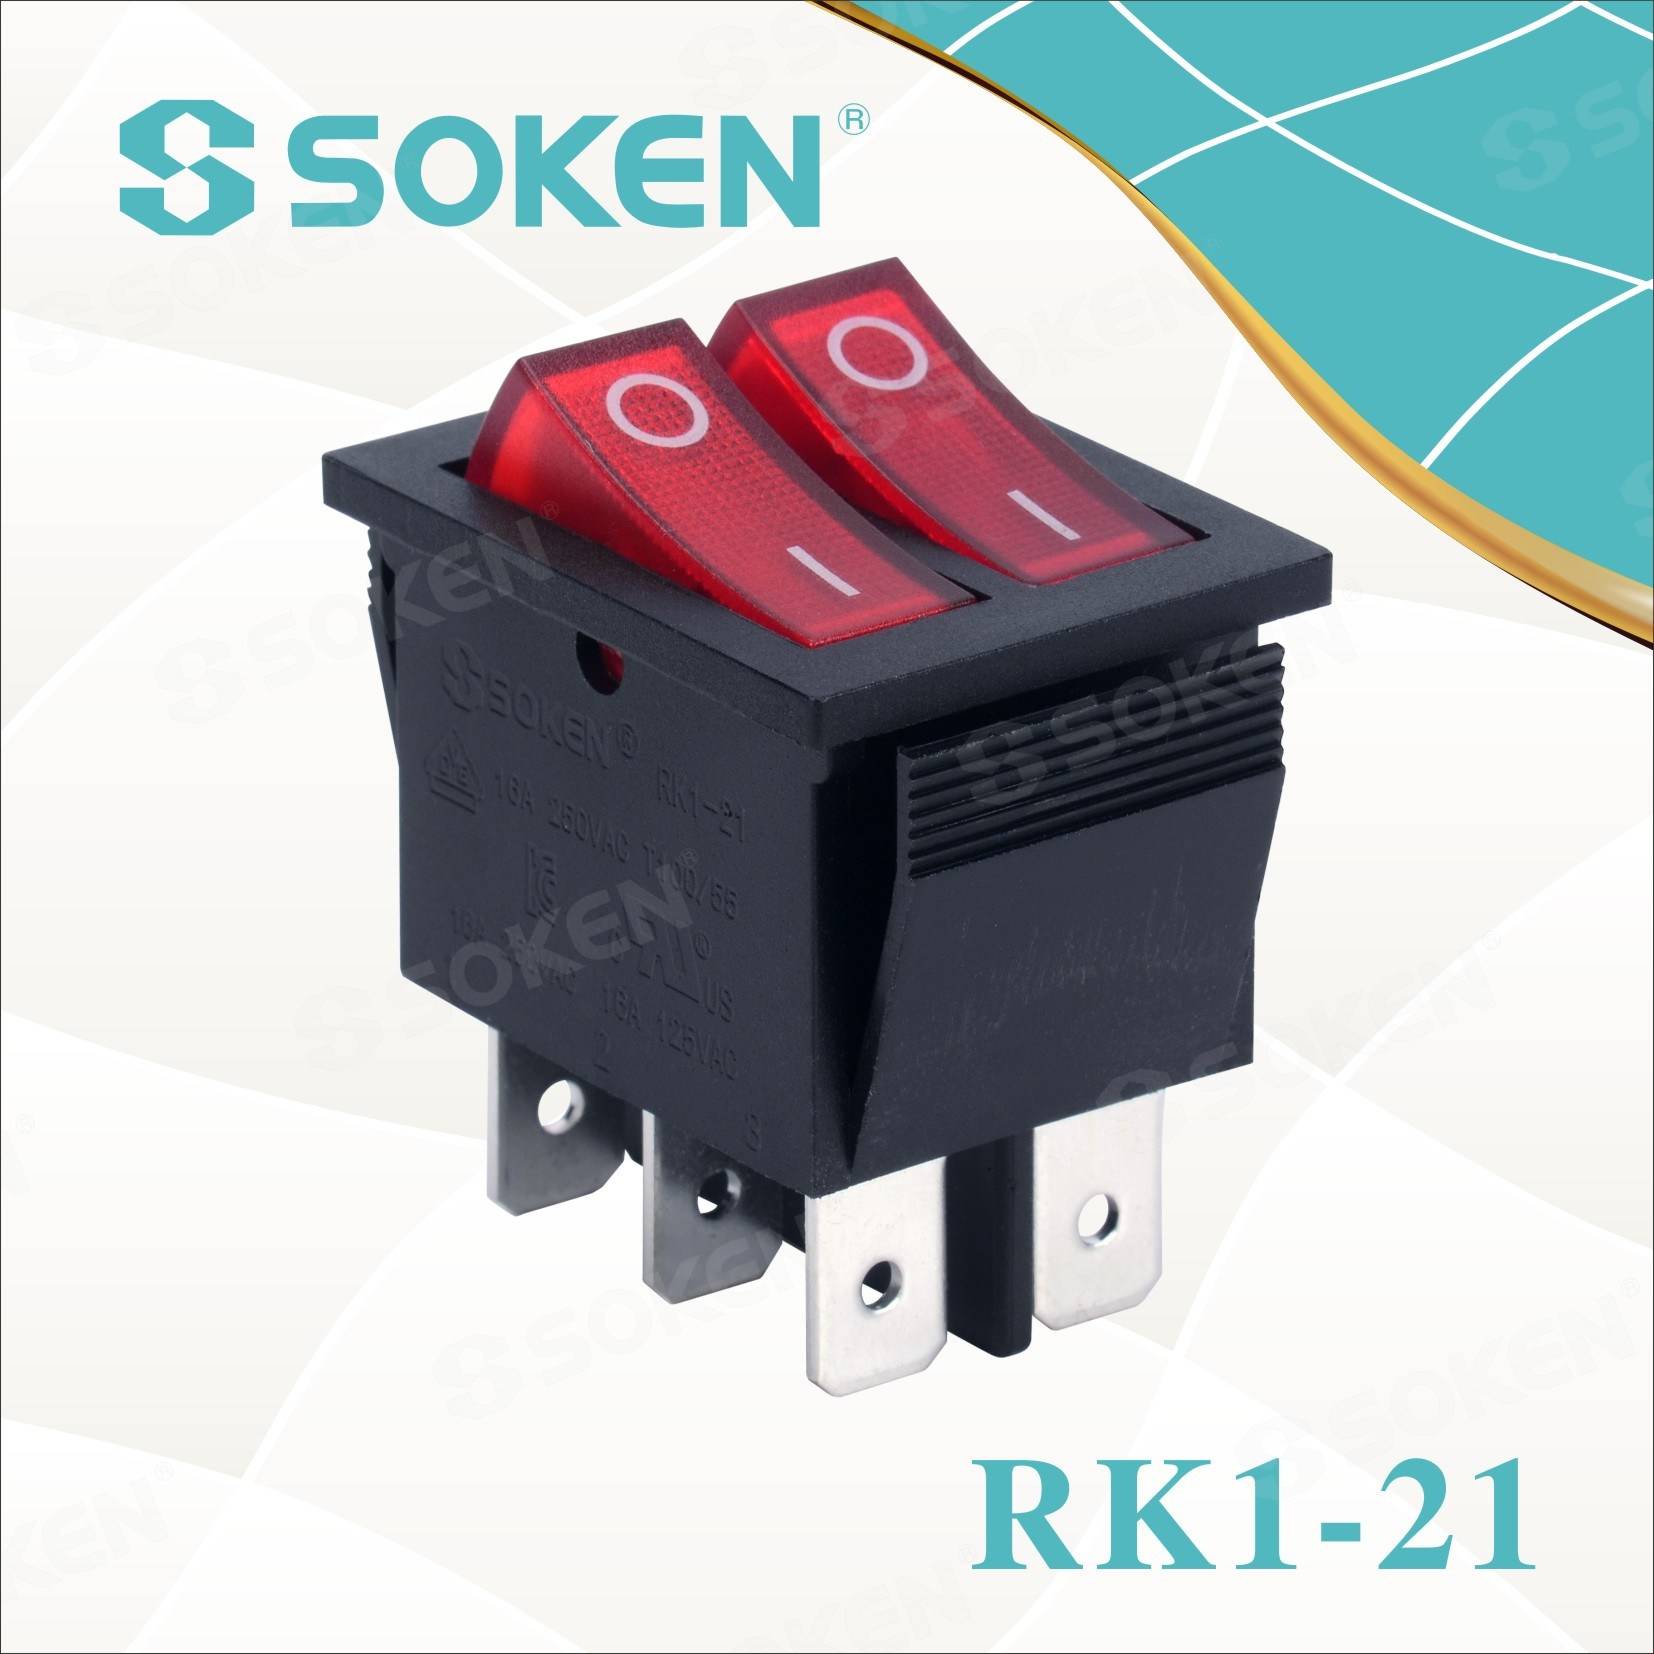 Hot-selling Micro Push Button Switch -
 Soken Rk1-21 on off Illuminated Double Rocker Switch – Master Soken Electrical